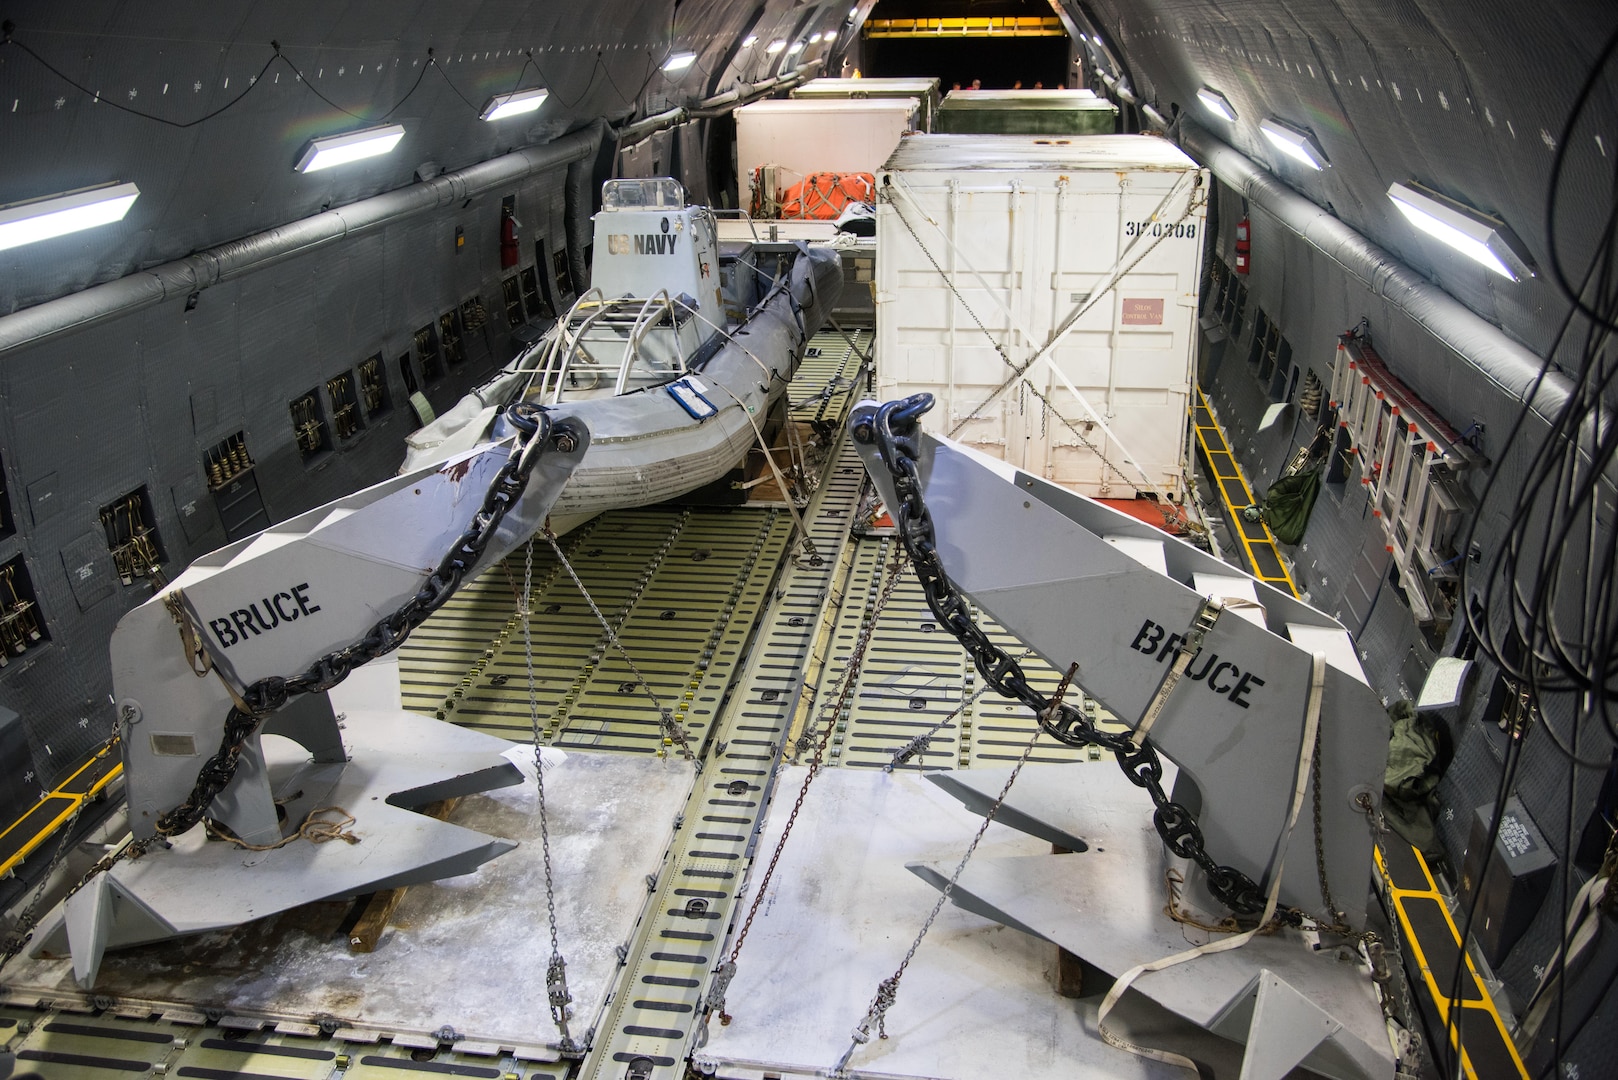 A U.S. Air Force C-5M Super Galaxy aircraft from the 22nd Airlift Squadron is loaded with U.S Navy rescue equipment at Marine Corps Air Station Miramar, Calif., Nov. 18, 2017. The equipment will be delivered to Argentina and used to aid in the search for the Argentina Navy submarine A.R.A San Juan. Air Mobility Command aircraft are delivering equipment and expertise to assist a partner nation. (U.S. Air Force photo by Staff Sgt. Nicole Leidholm)